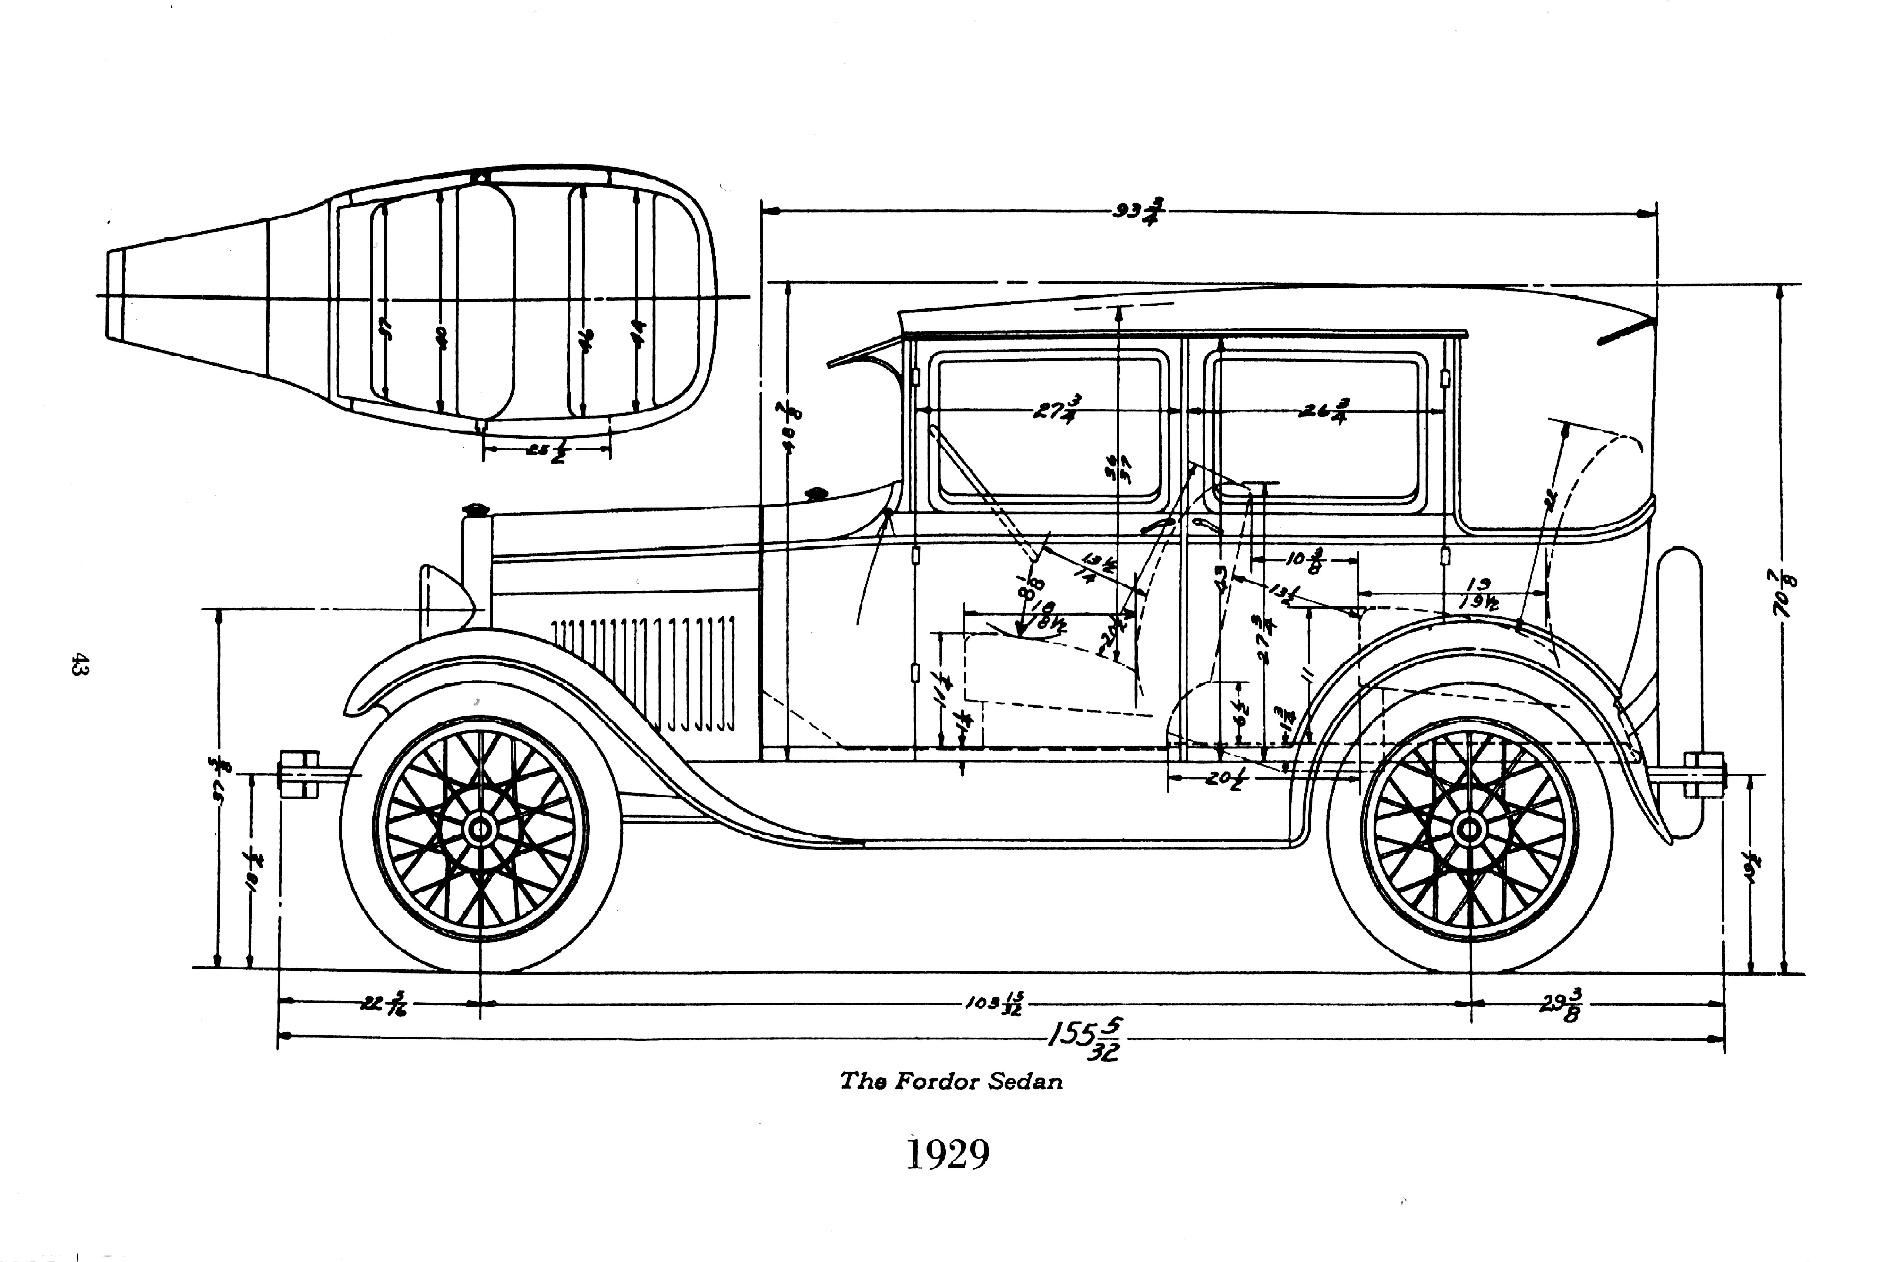 1930 Ford chassis dimensions #3